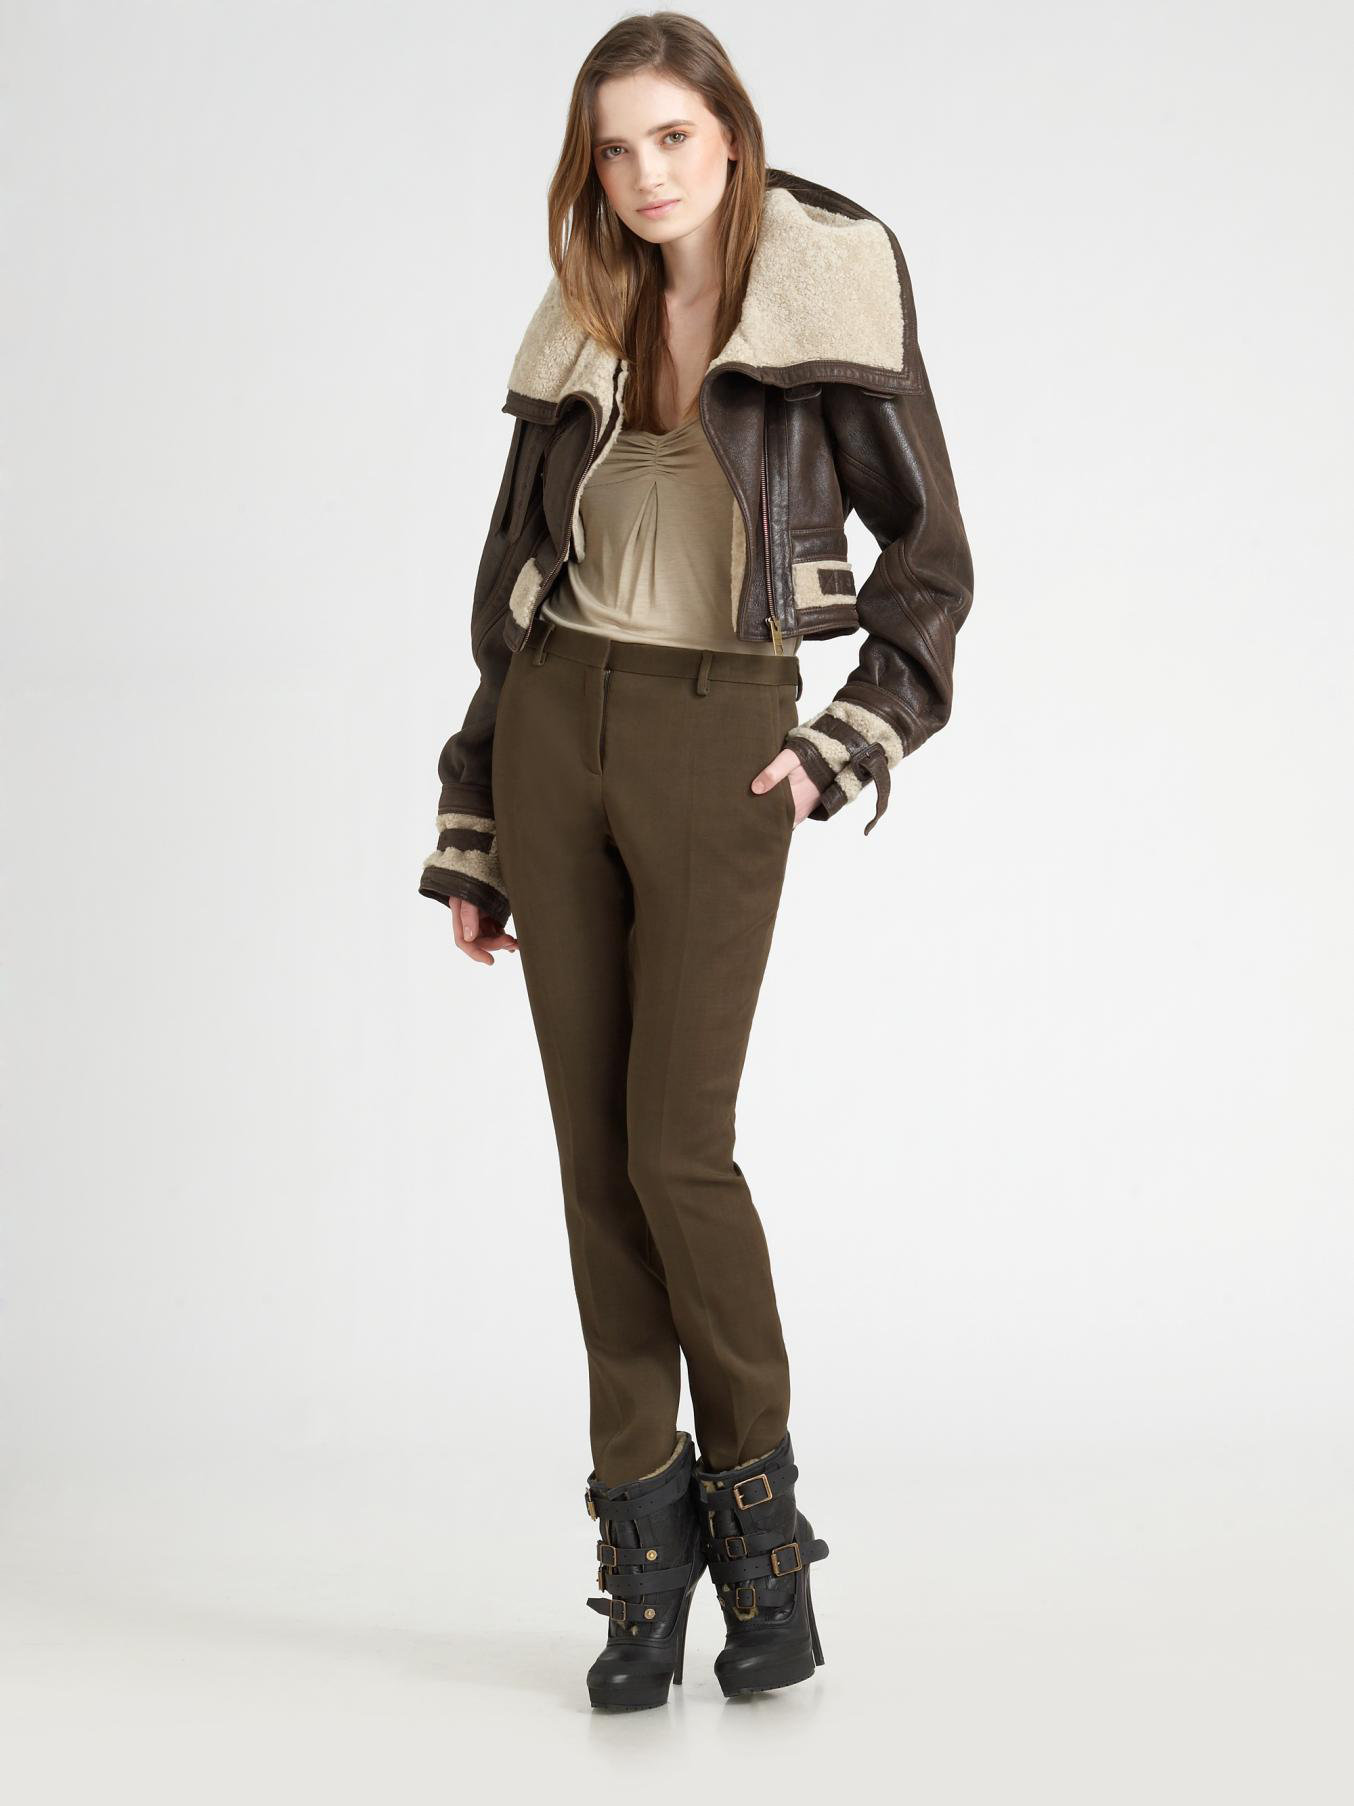 Burberry Prorsum Shearling Aviator Jacket in Brown - Lyst